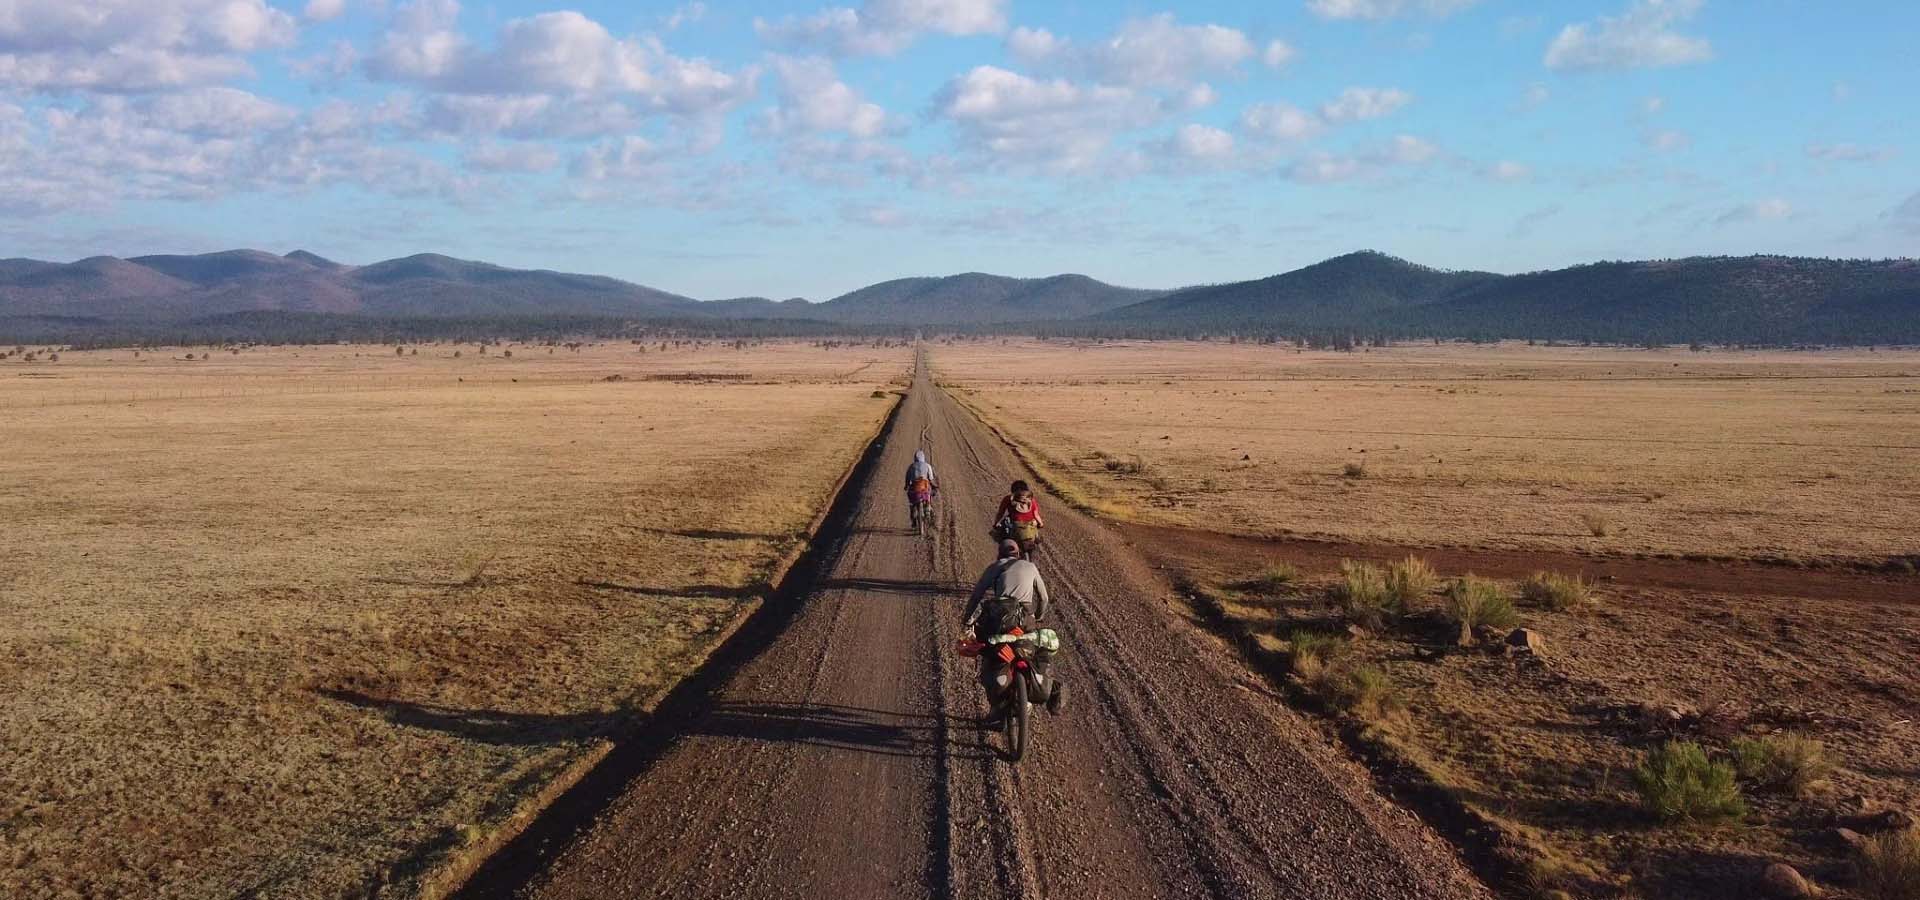 Three people riding bikes on a dirt road.